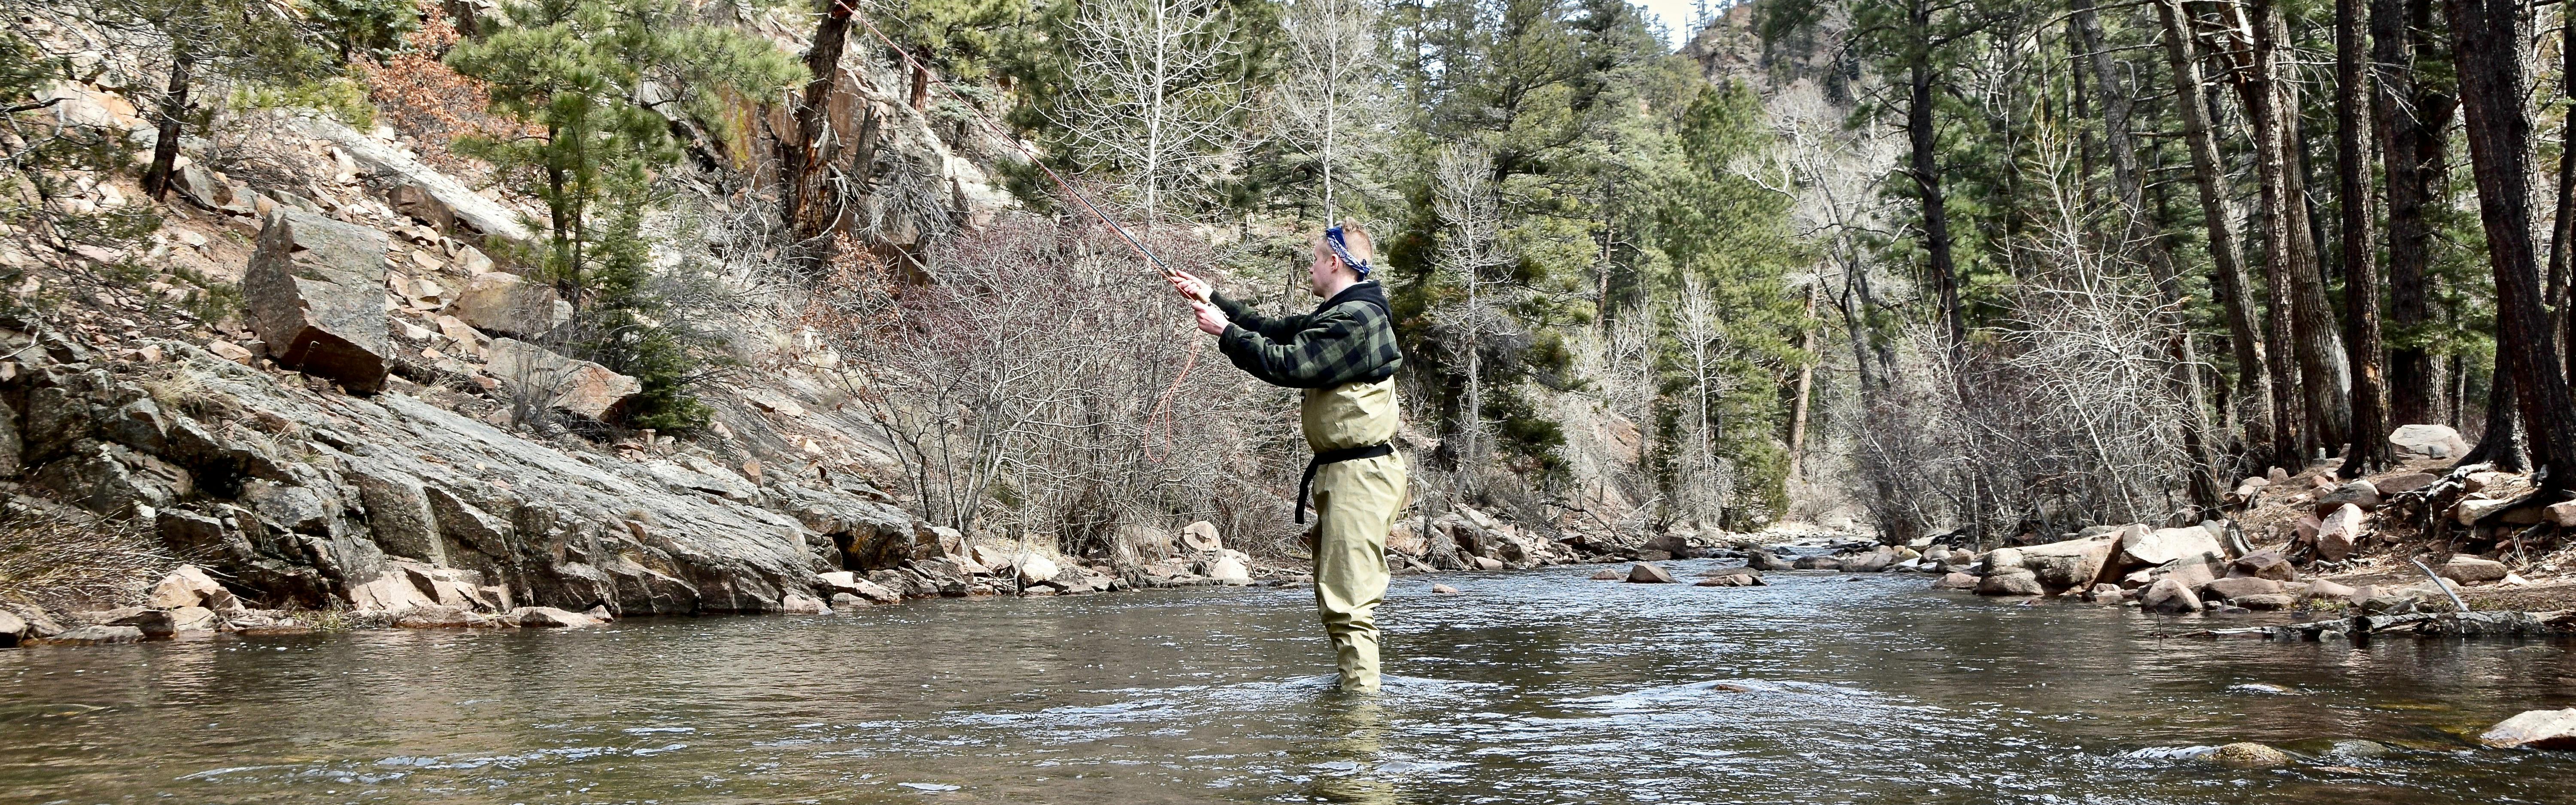 A man stands in a river in waders as he fly fishes.